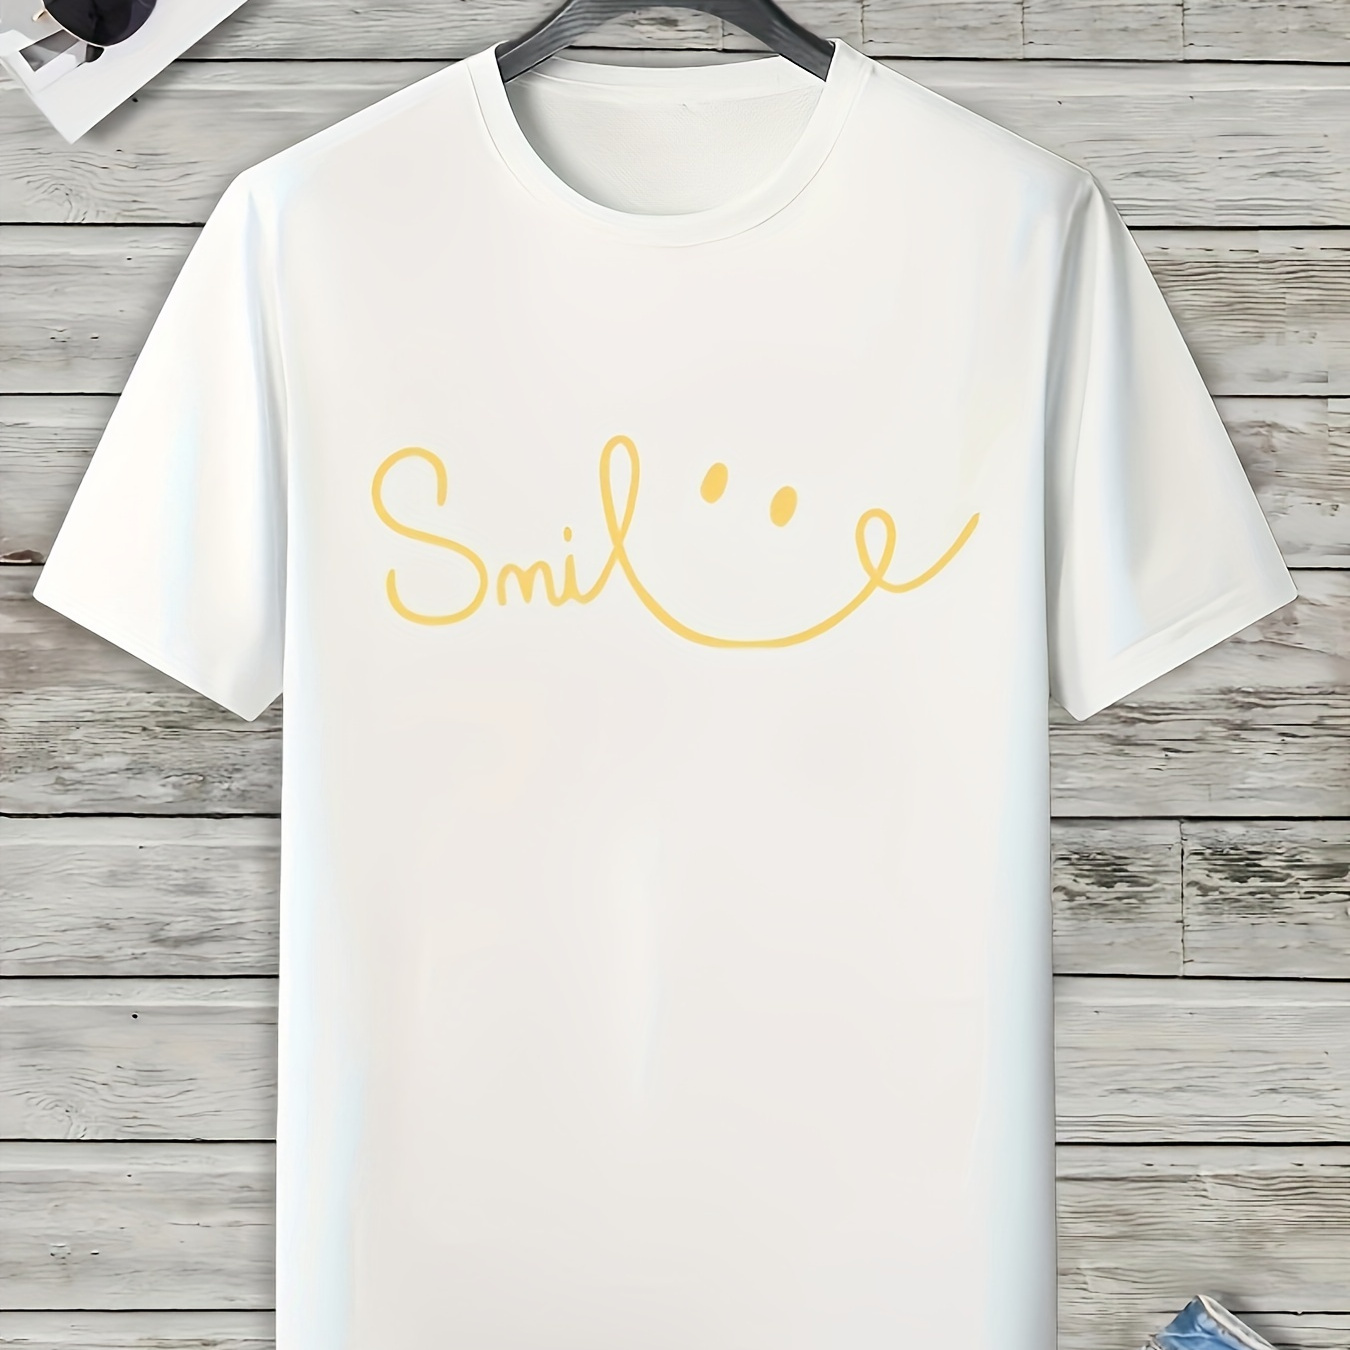 

Smile Print, Men's Graphic T-shirt, Casual Comfy Tees For Summer, Mens Clothing